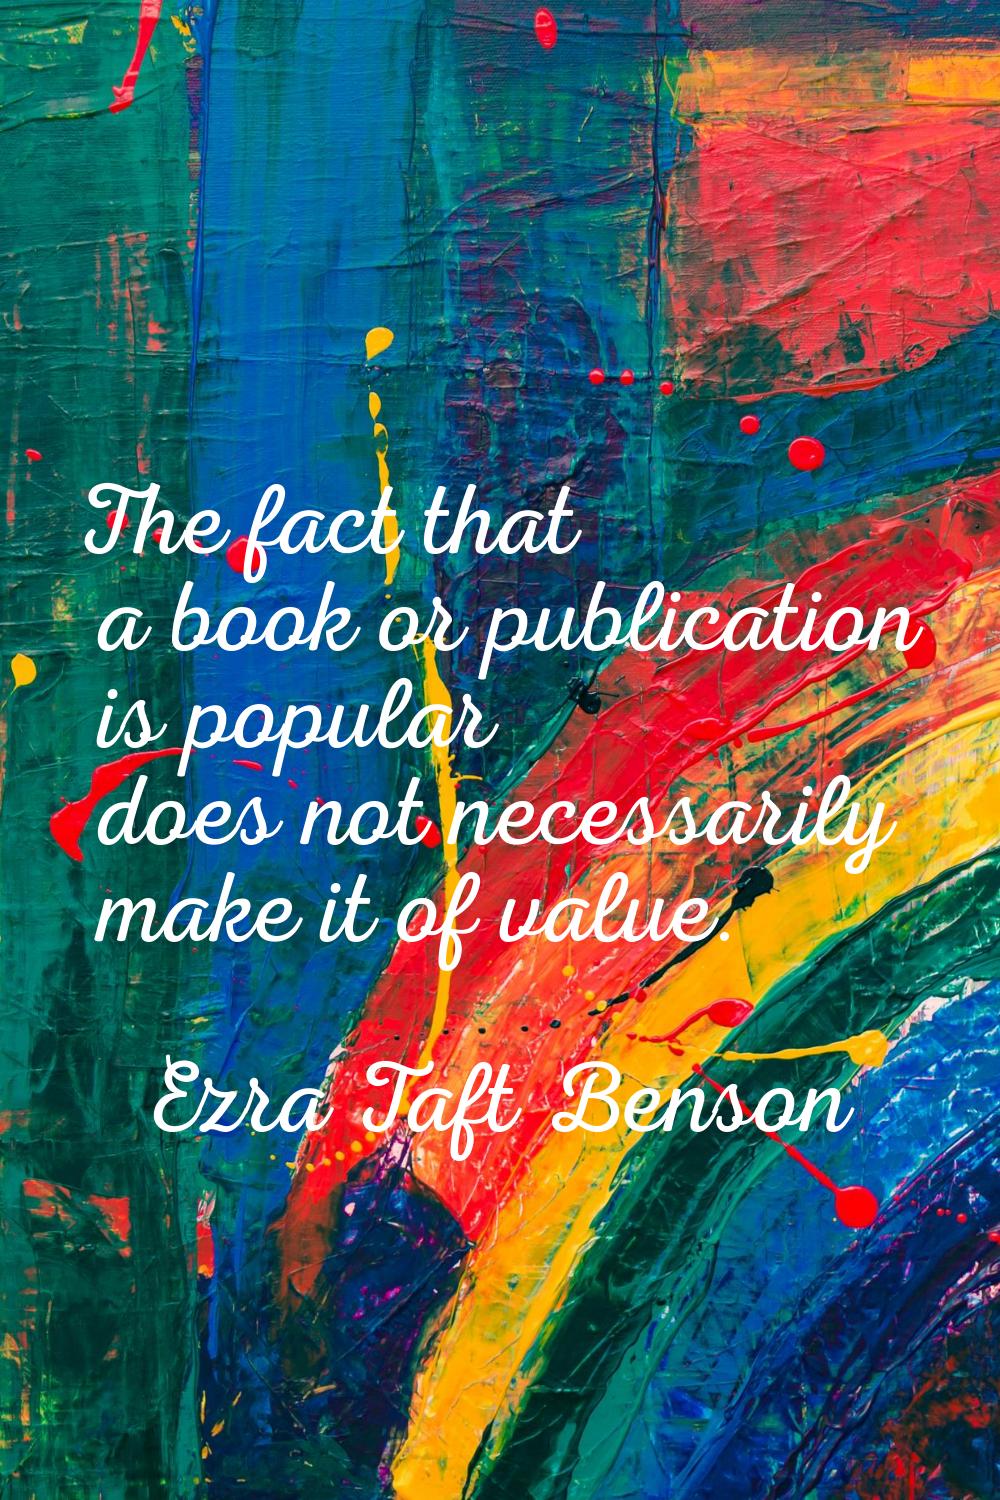 The fact that a book or publication is popular does not necessarily make it of value.